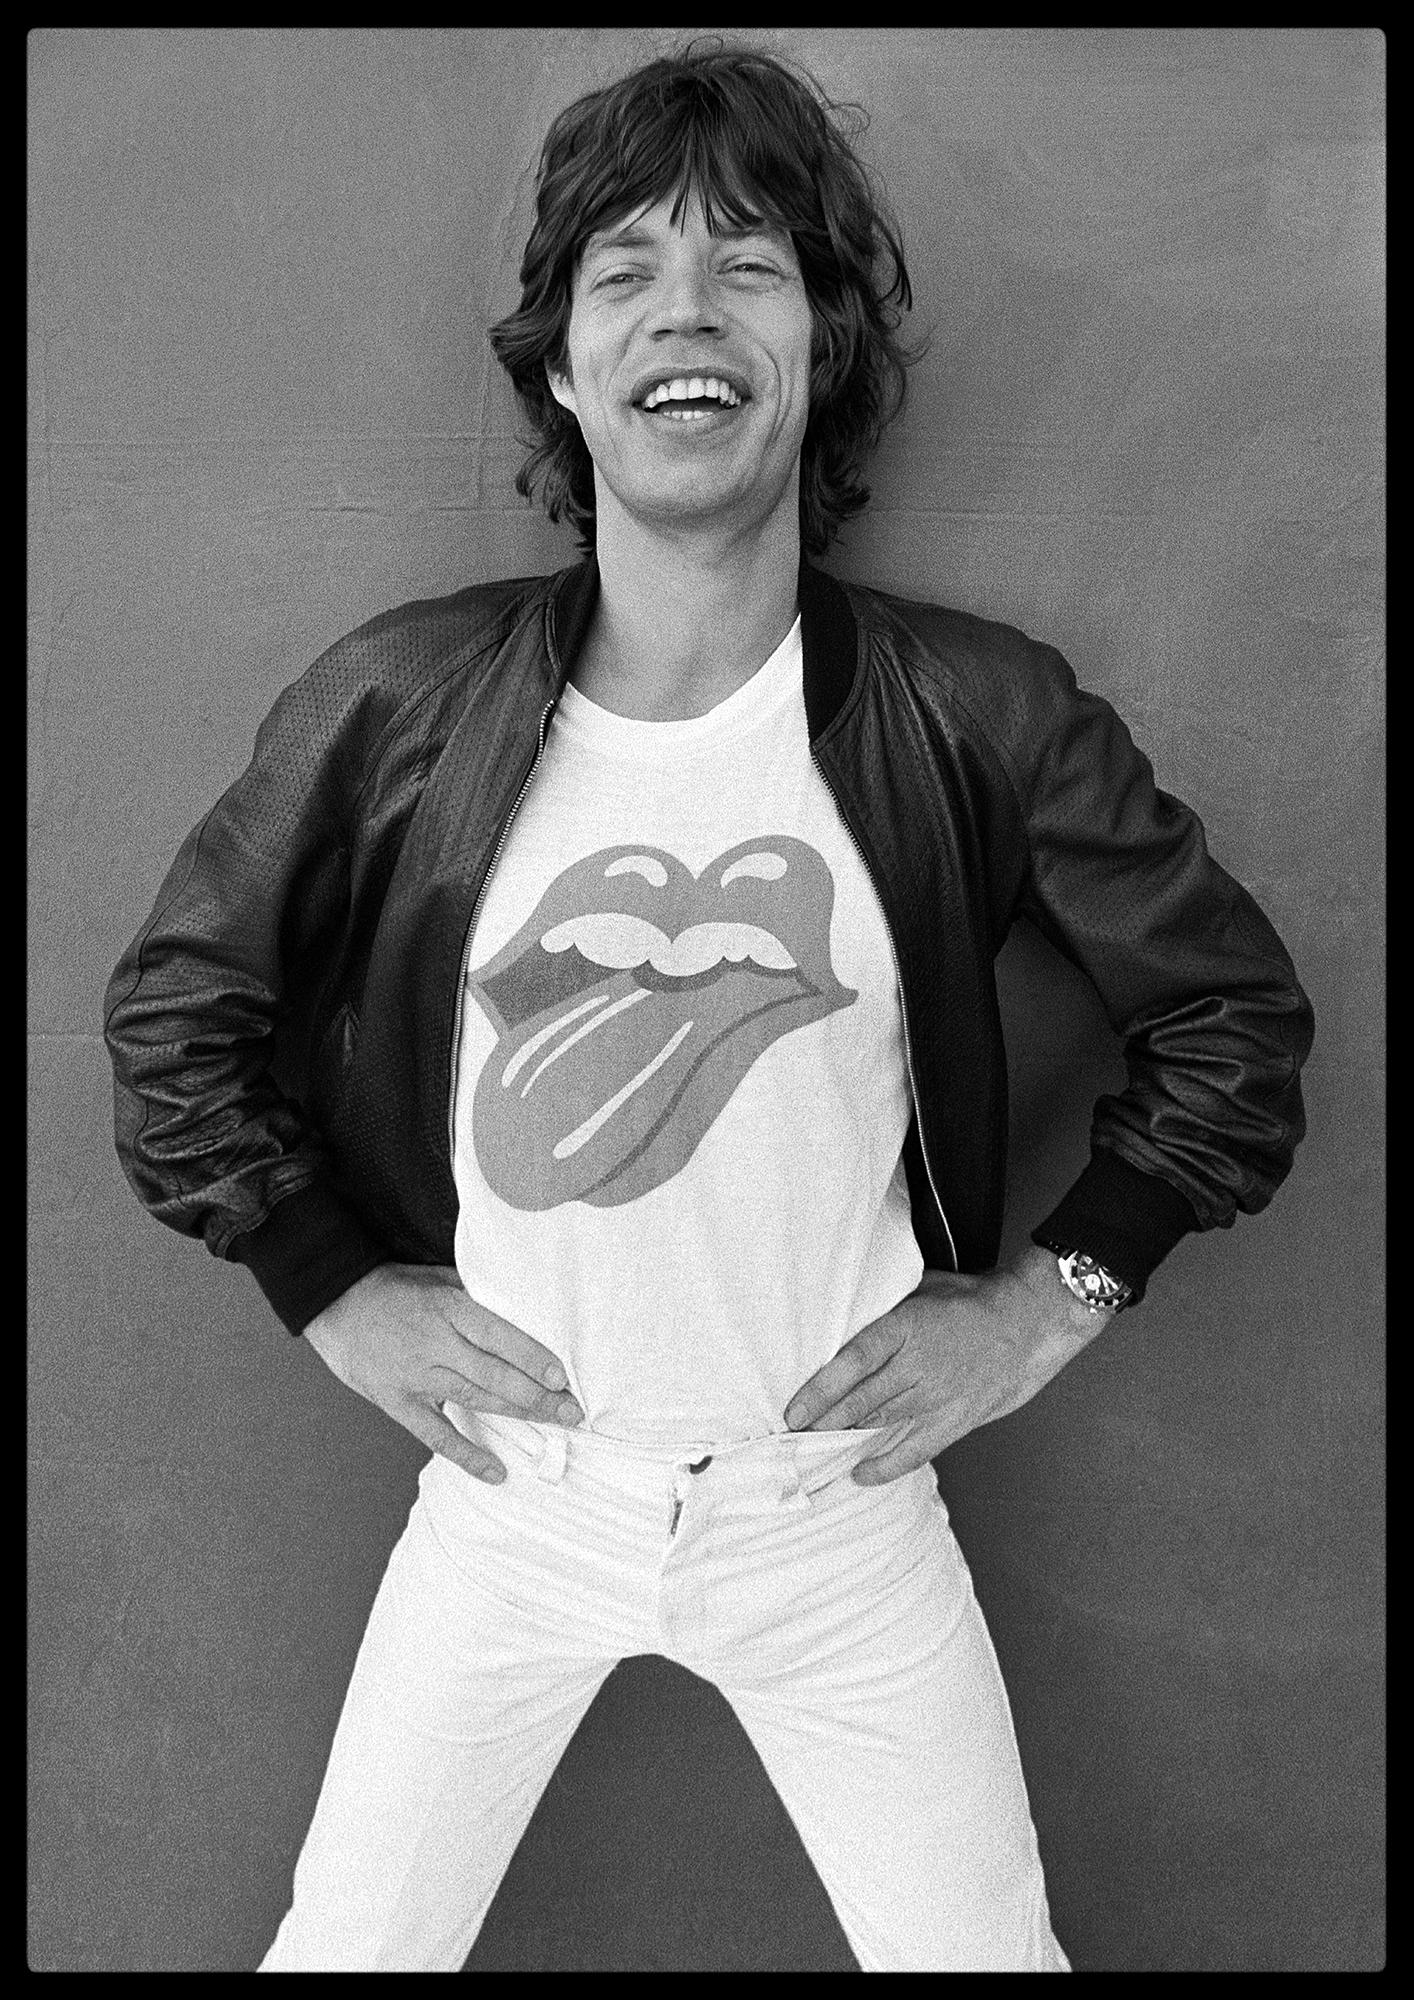 Forty Licks Mick Jagger 1977 limited edition iconic photograph by Arthur Steel